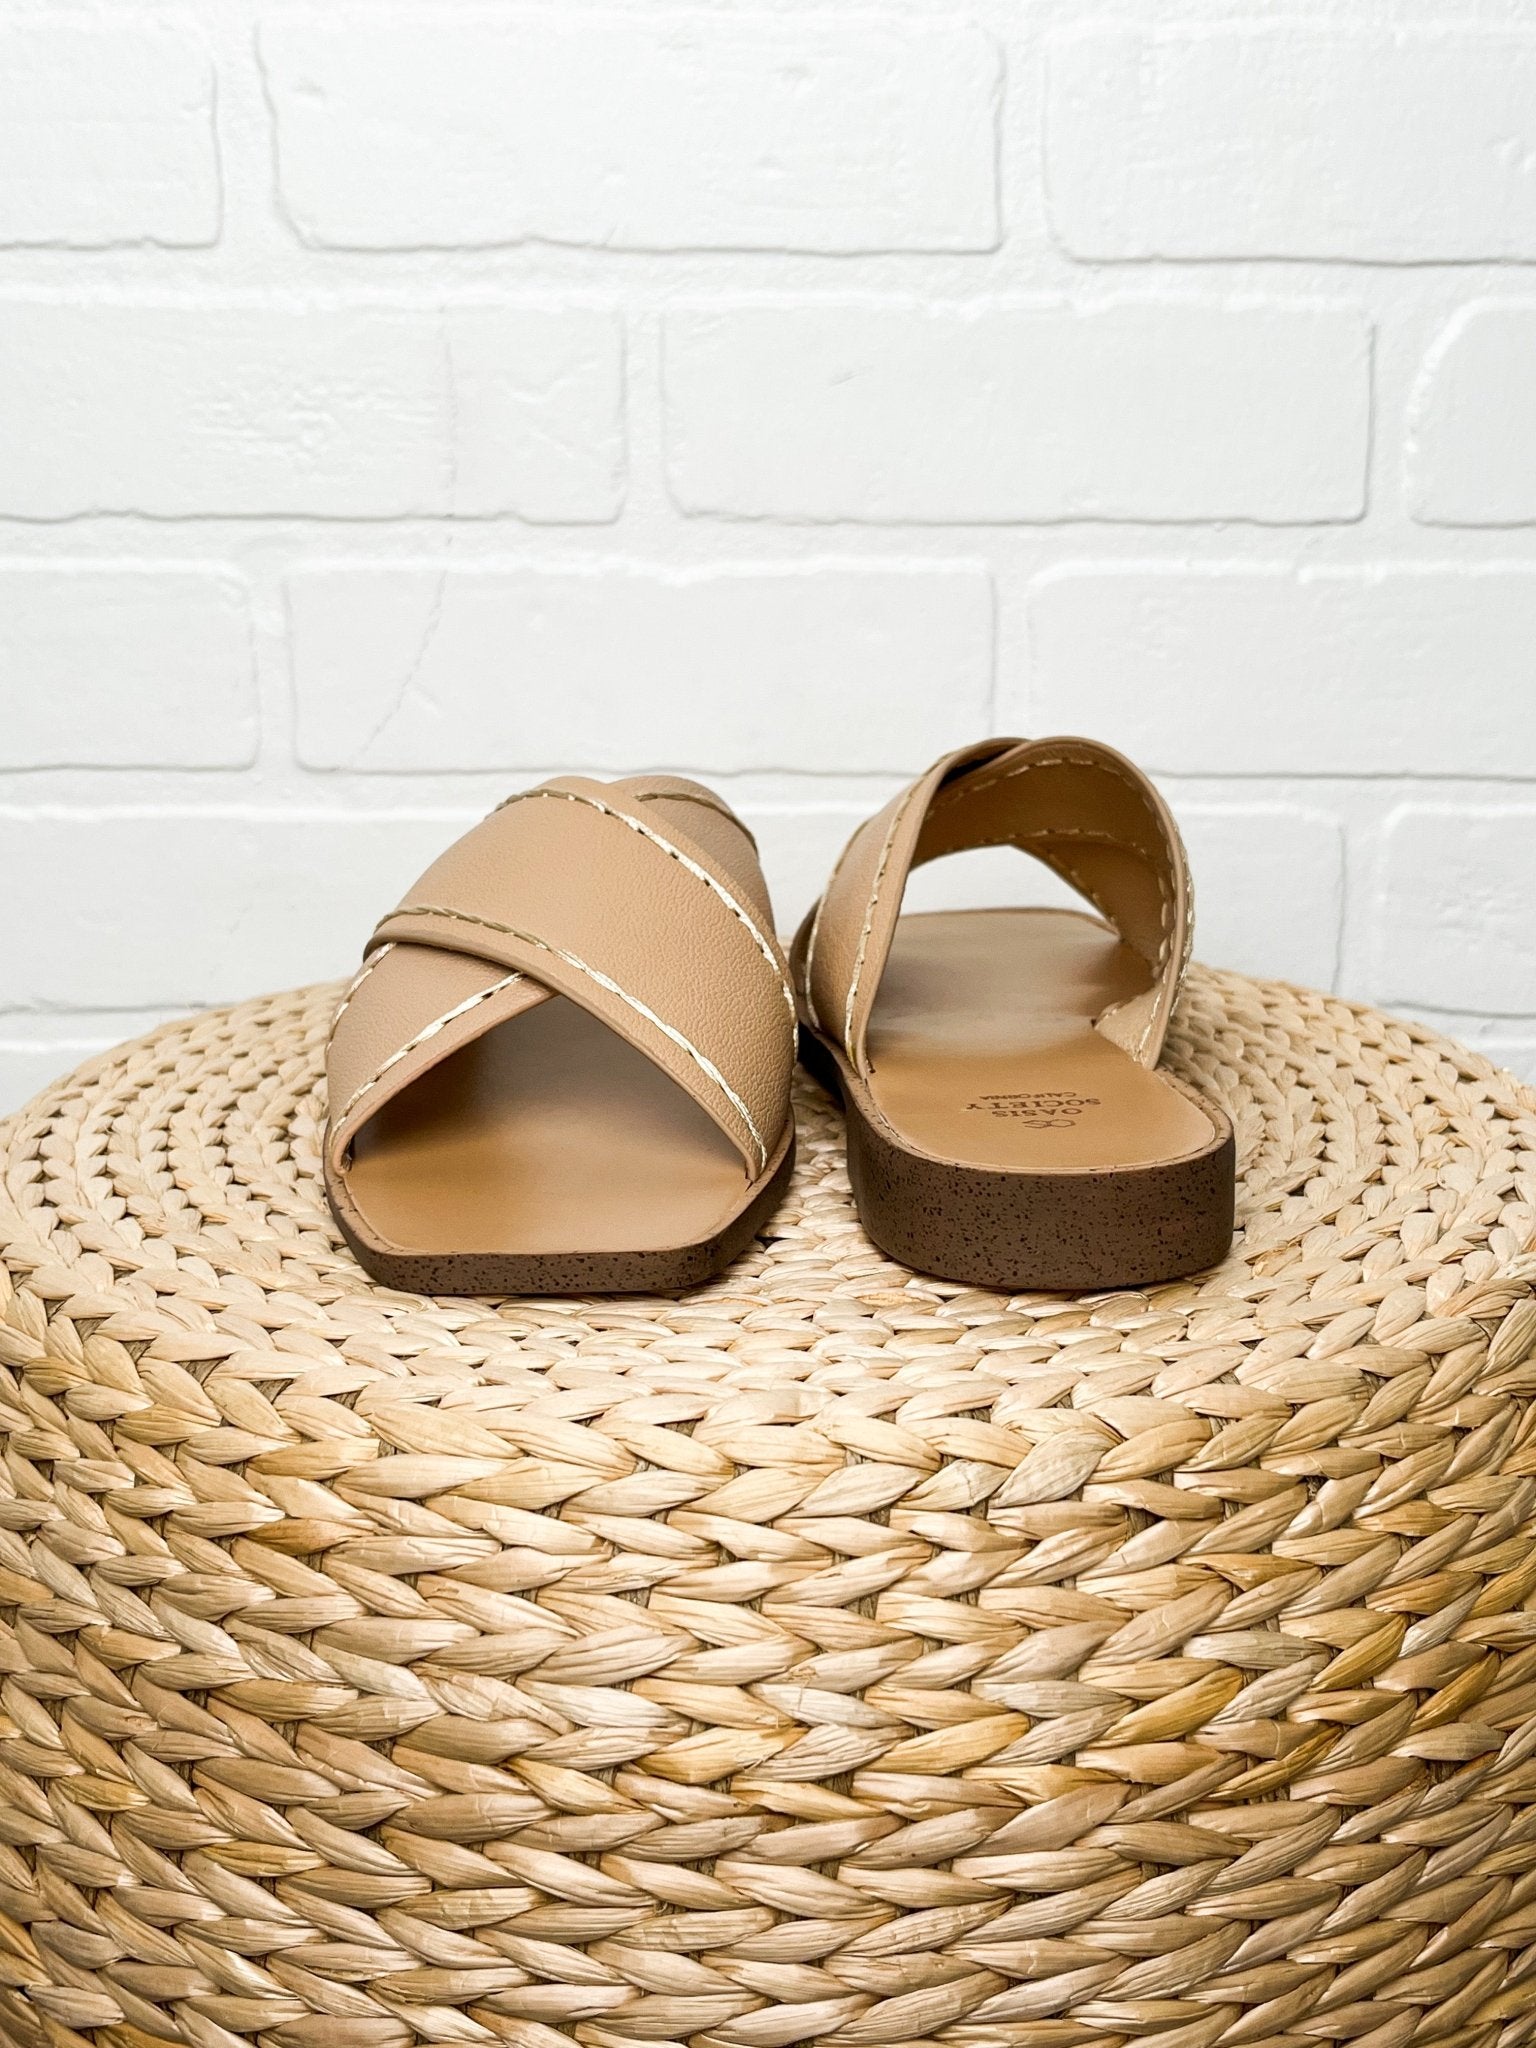 Stella criss cross sandals nude - Affordable shoes - Boutique Shoes at Lush Fashion Lounge Boutique in Oklahoma City